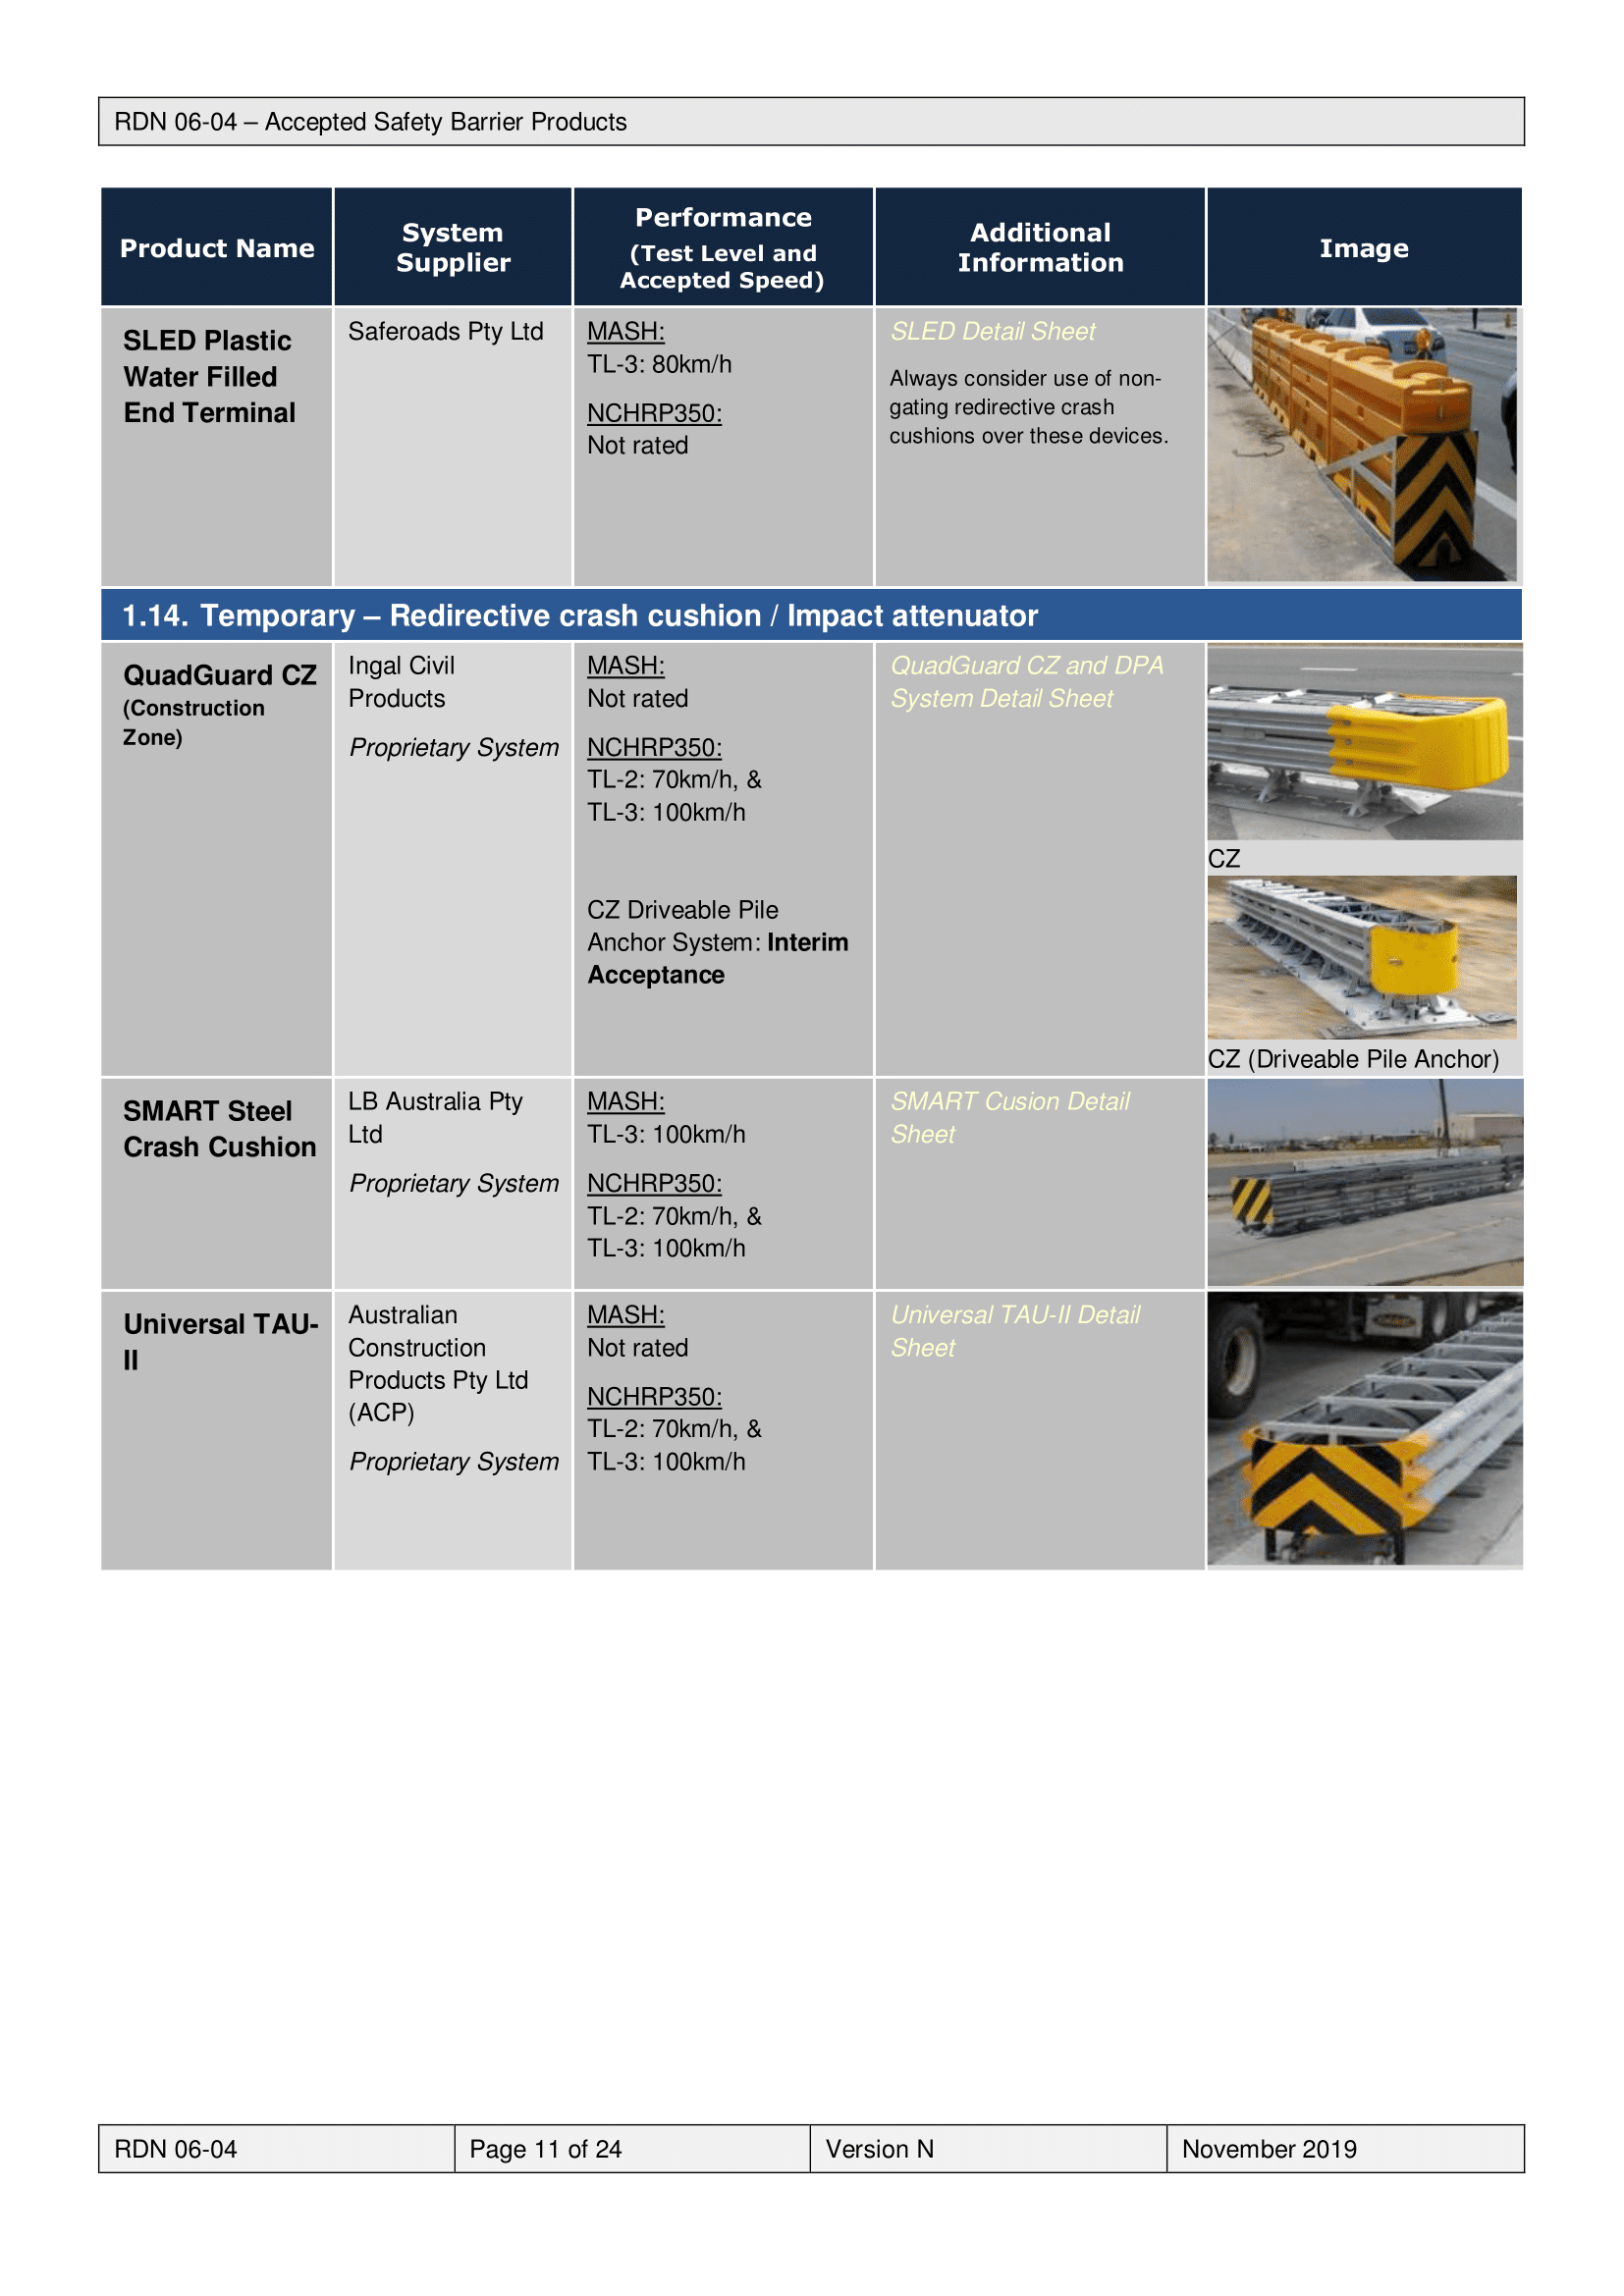 Road Design Note 0604 N Accepted Safety Barrier Products 11 2019-11